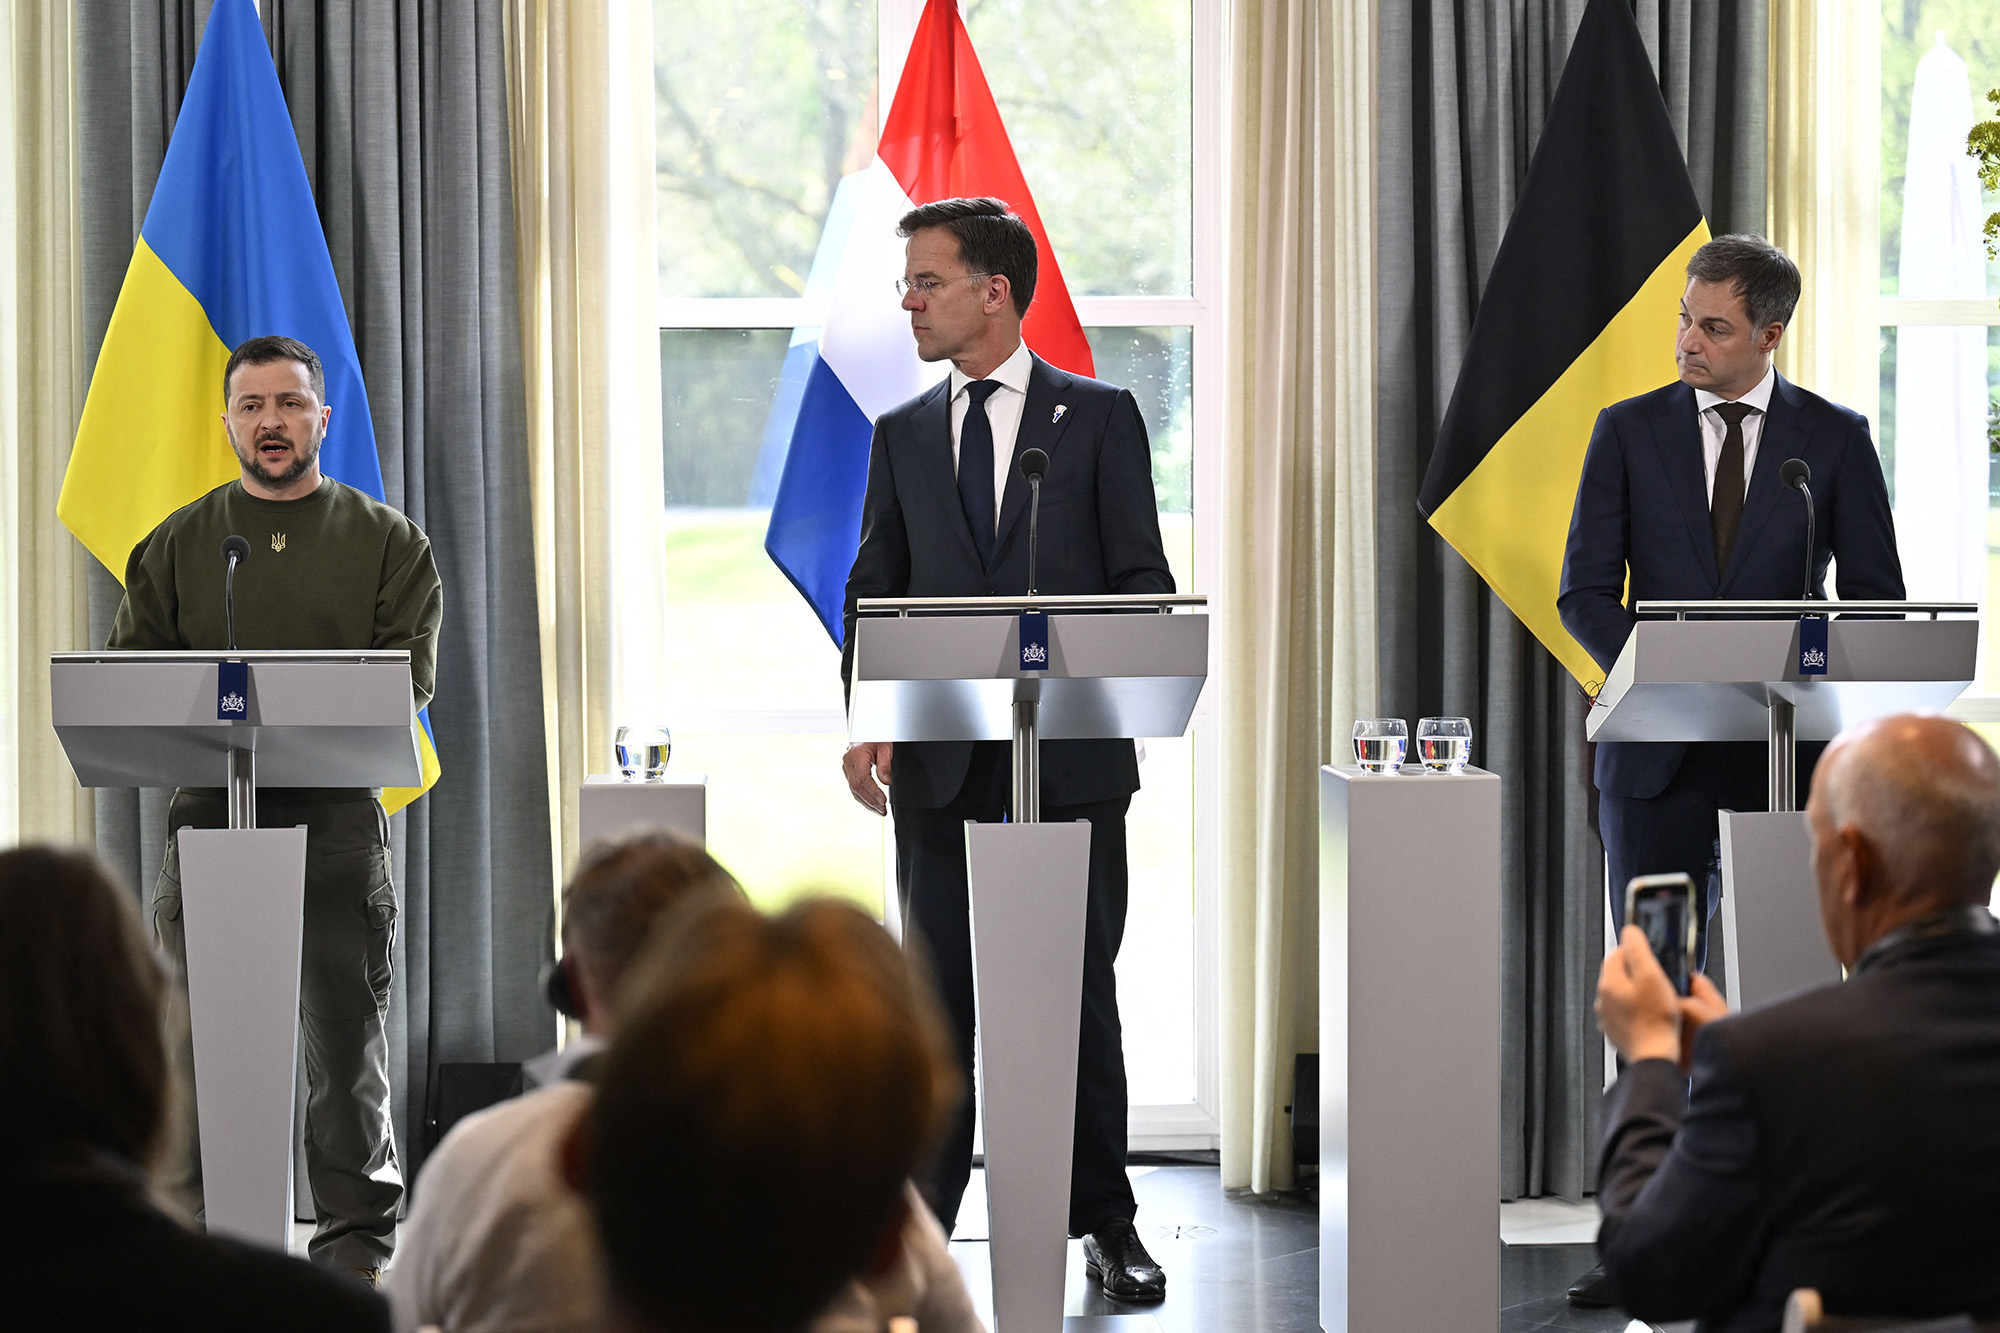 Ukraine president Volodymyr Zelensky, left, Prime Minister of the Netherlands Mark Rutte, center, and Prime Minister Alexander De Croo talk to the press after a meeting regarding the situation in Ukraine in The Hague, Netherlands, on May 4.